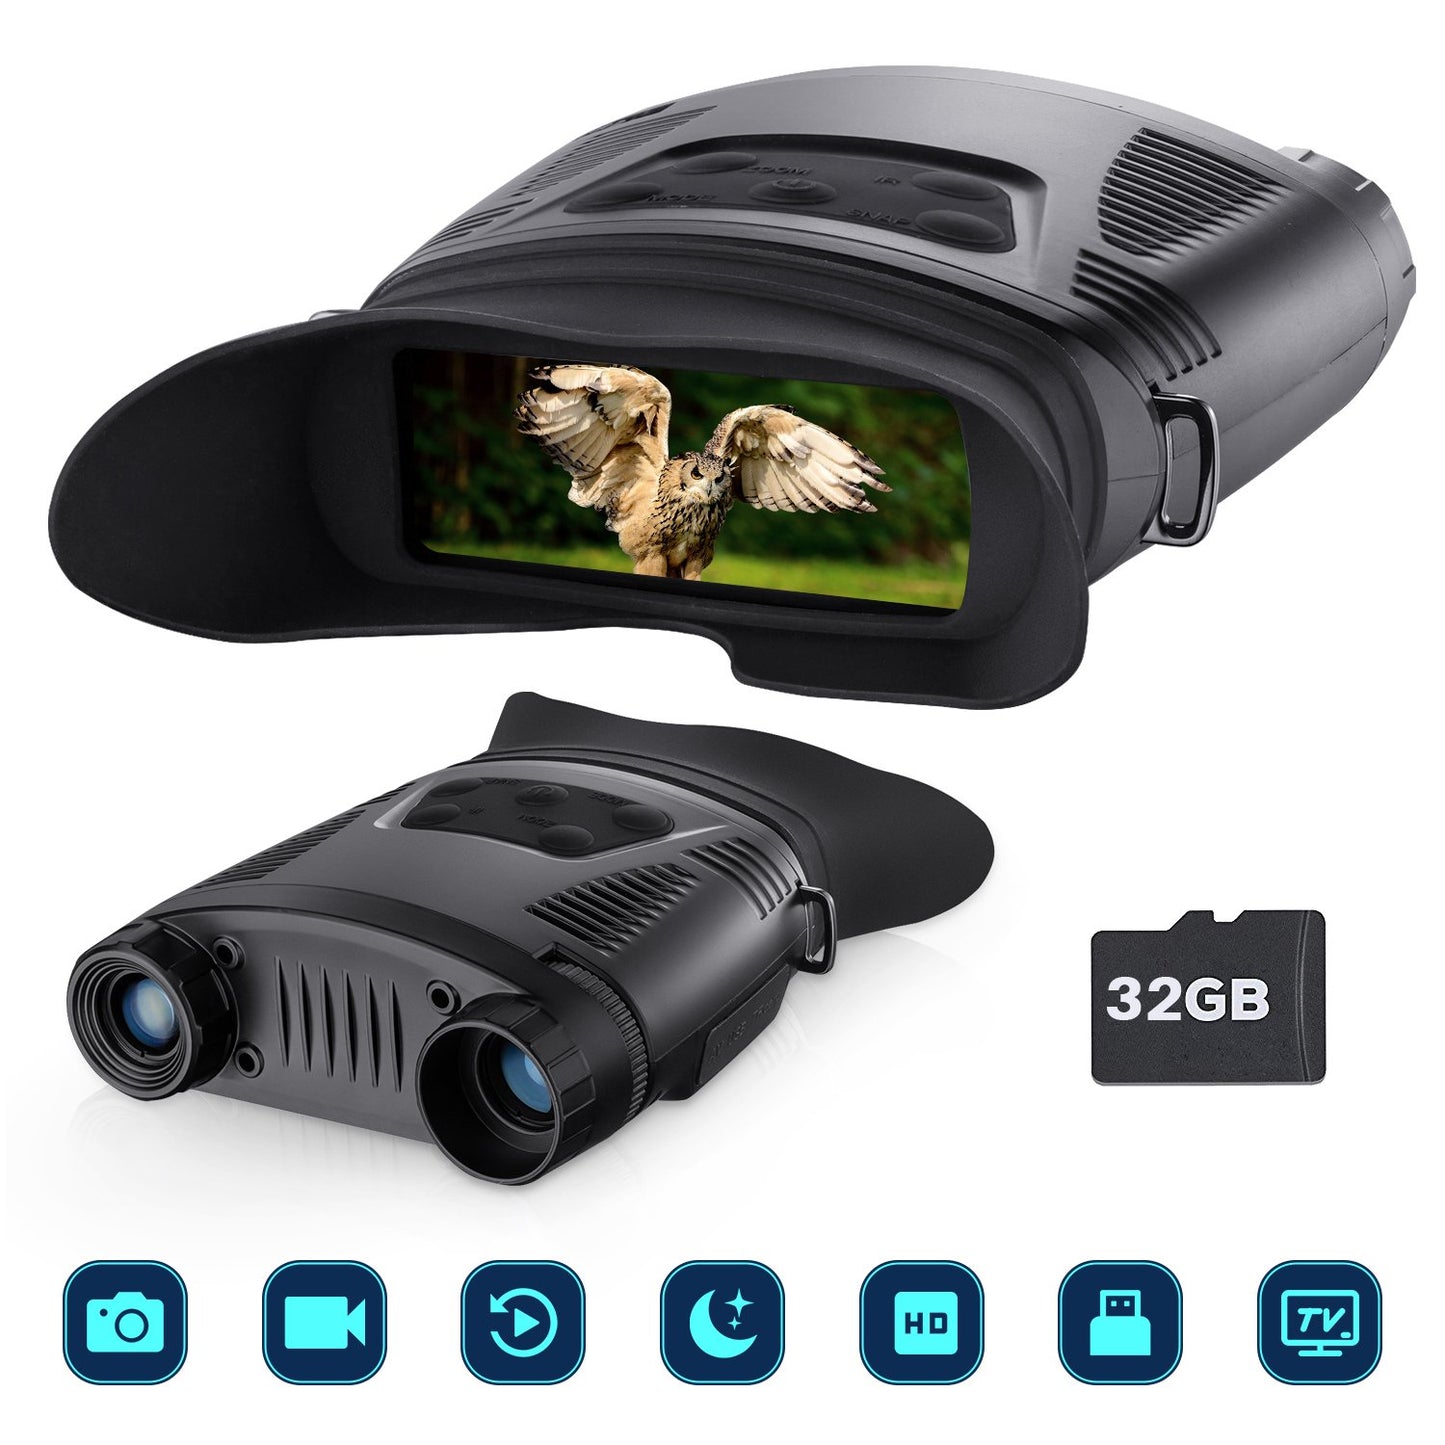 Night Vision Goggles -Night Vision Binoculars for Adults, 3.3'' Large Screen Binoculars can Save Photo and Video with 32GB Memory